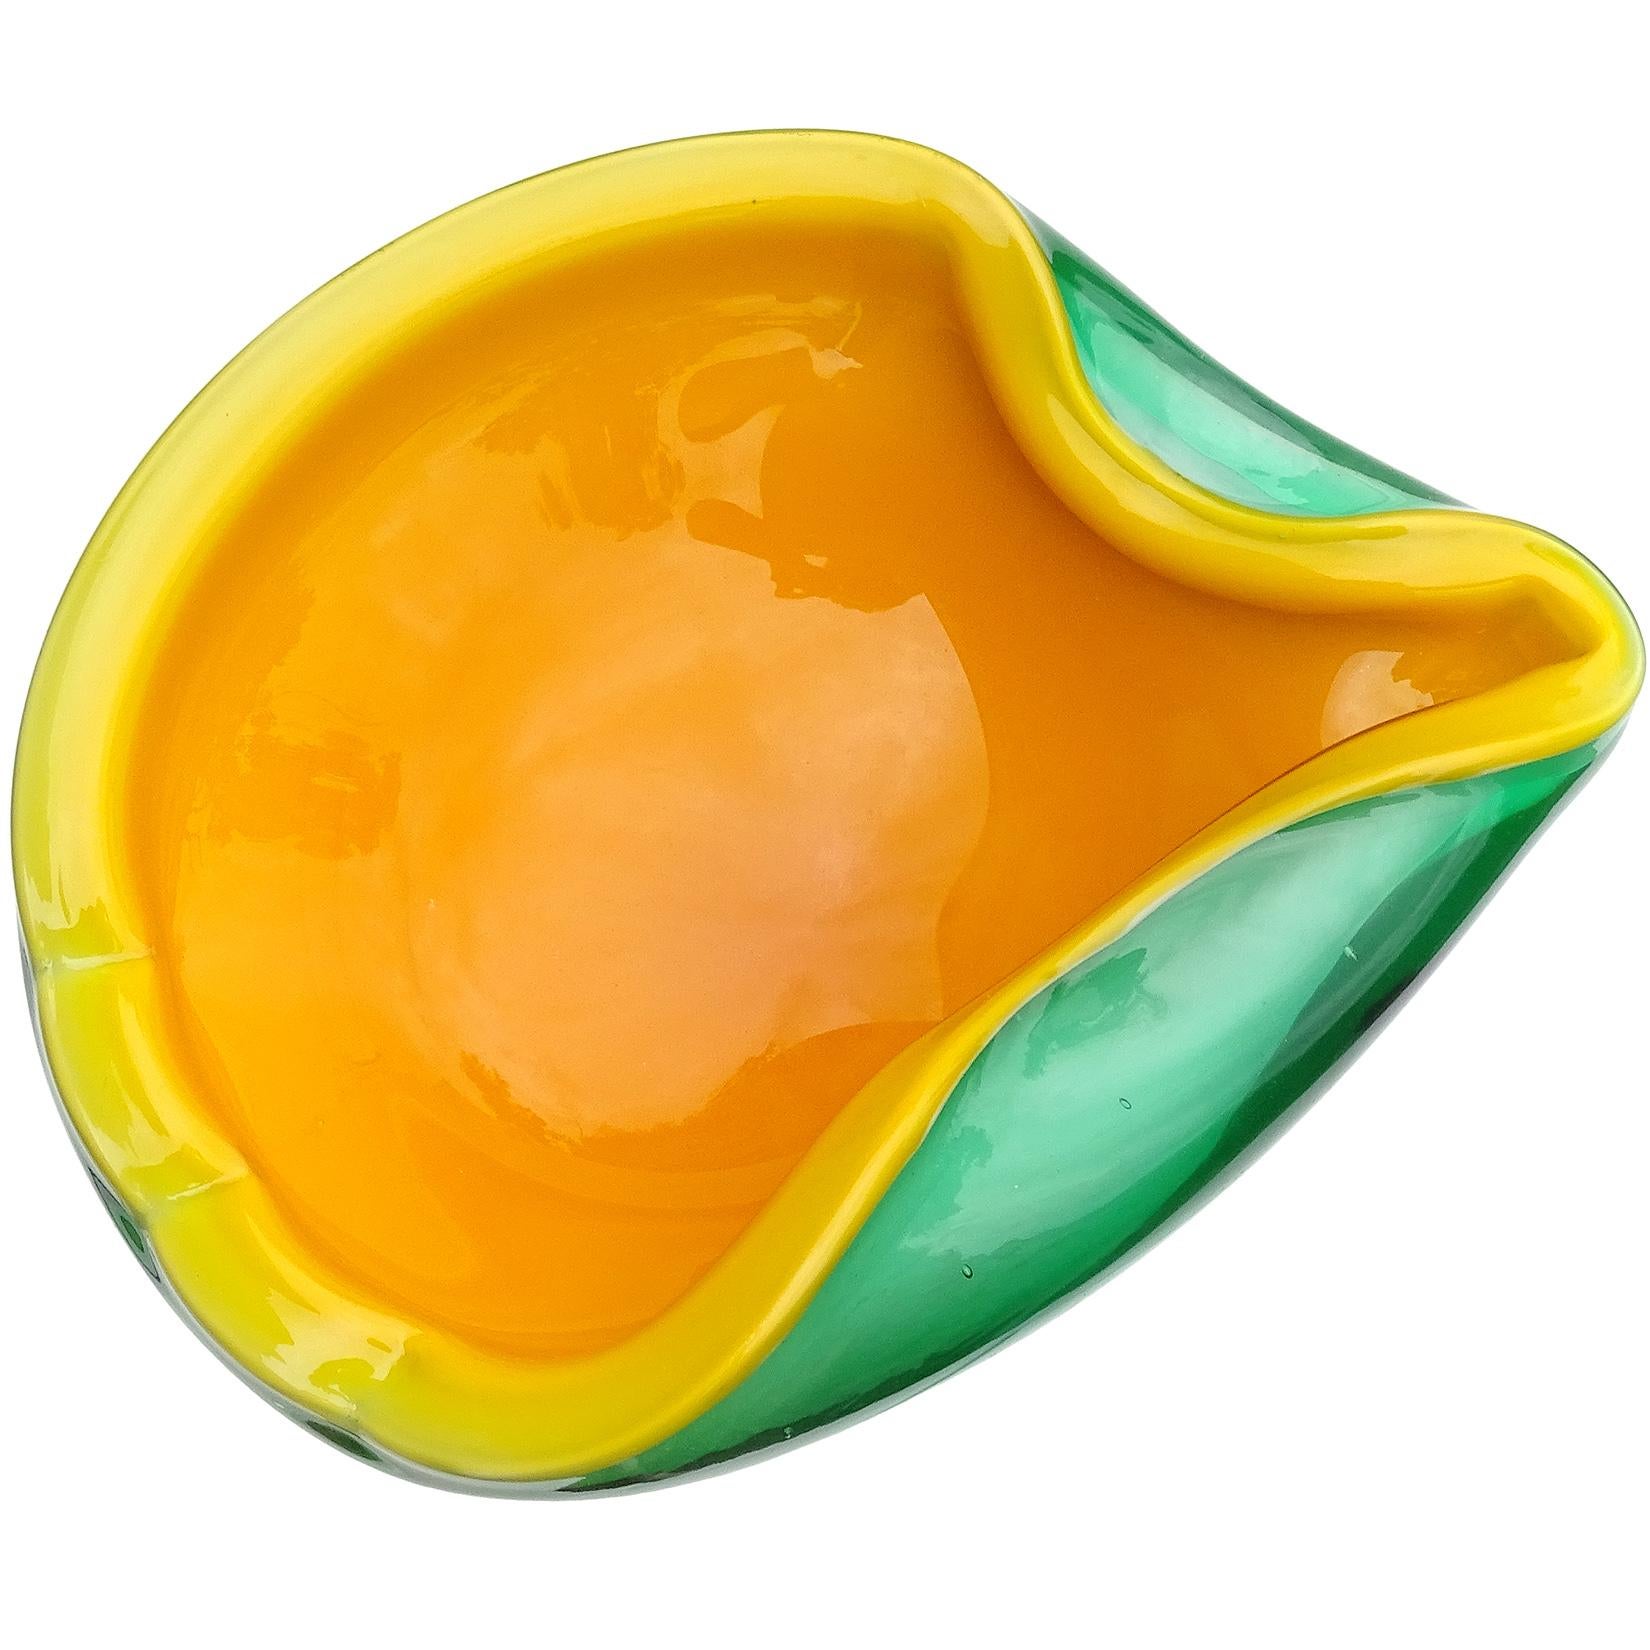 Beautiful Murano hand blown orange and green Italian art glass tropical bowl. Documented to the Fratelli Toso Company. The rich bright orange pops inside the green mango / melon color. Measures: 8